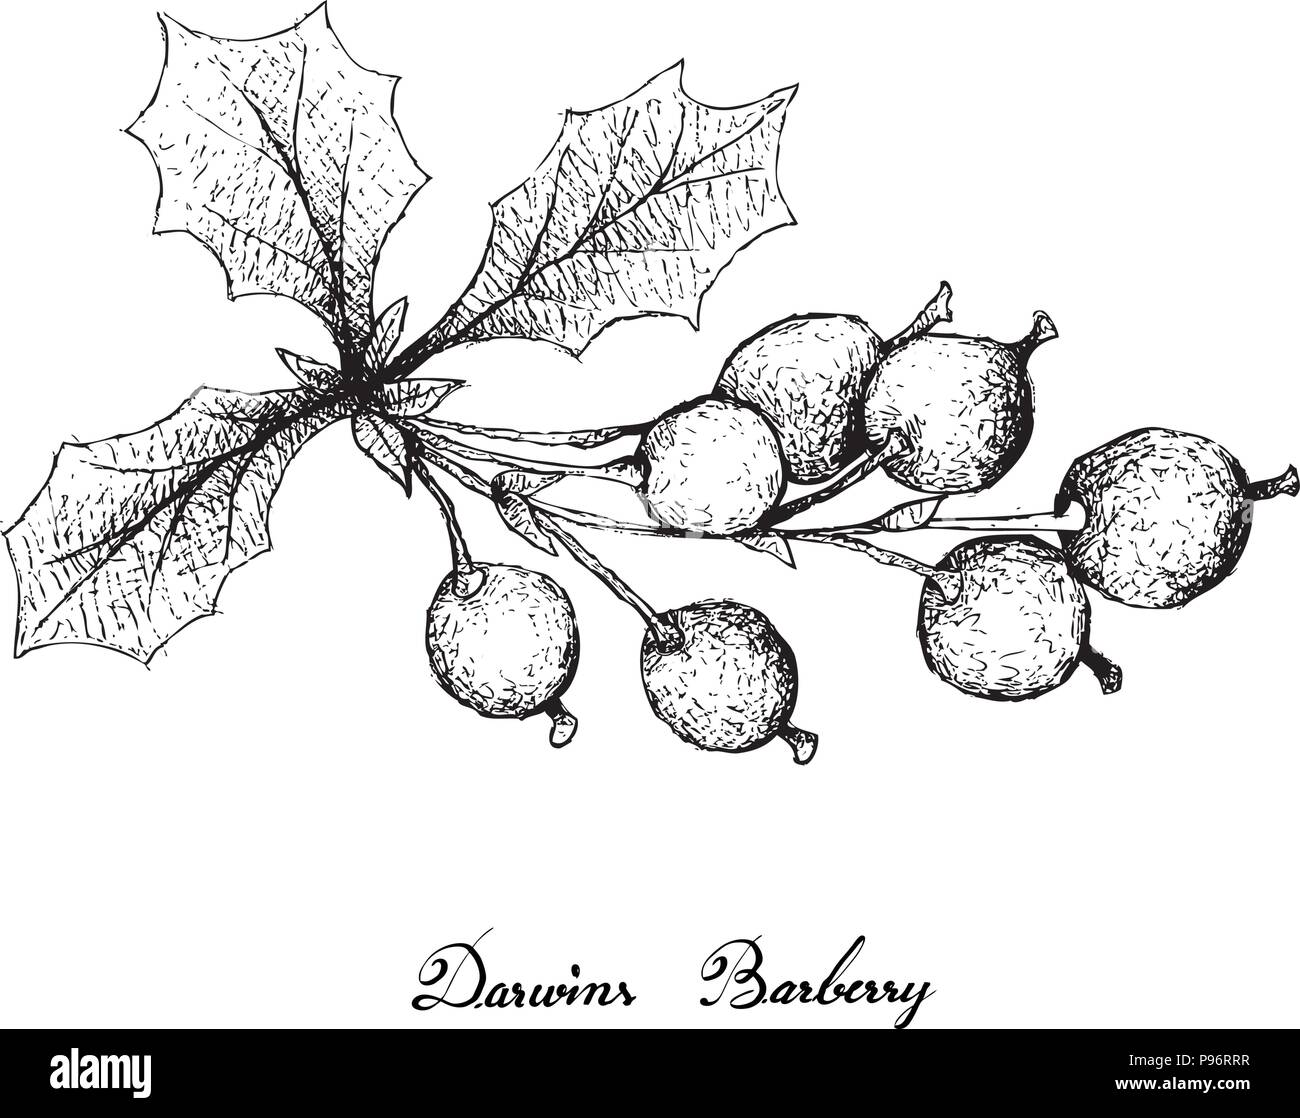 Berry Fruit, Illustration Hand Drawn Sketch of Fresh Barberries or Berberis Vulgaris Fruits Isolated on White Background. Stock Vector